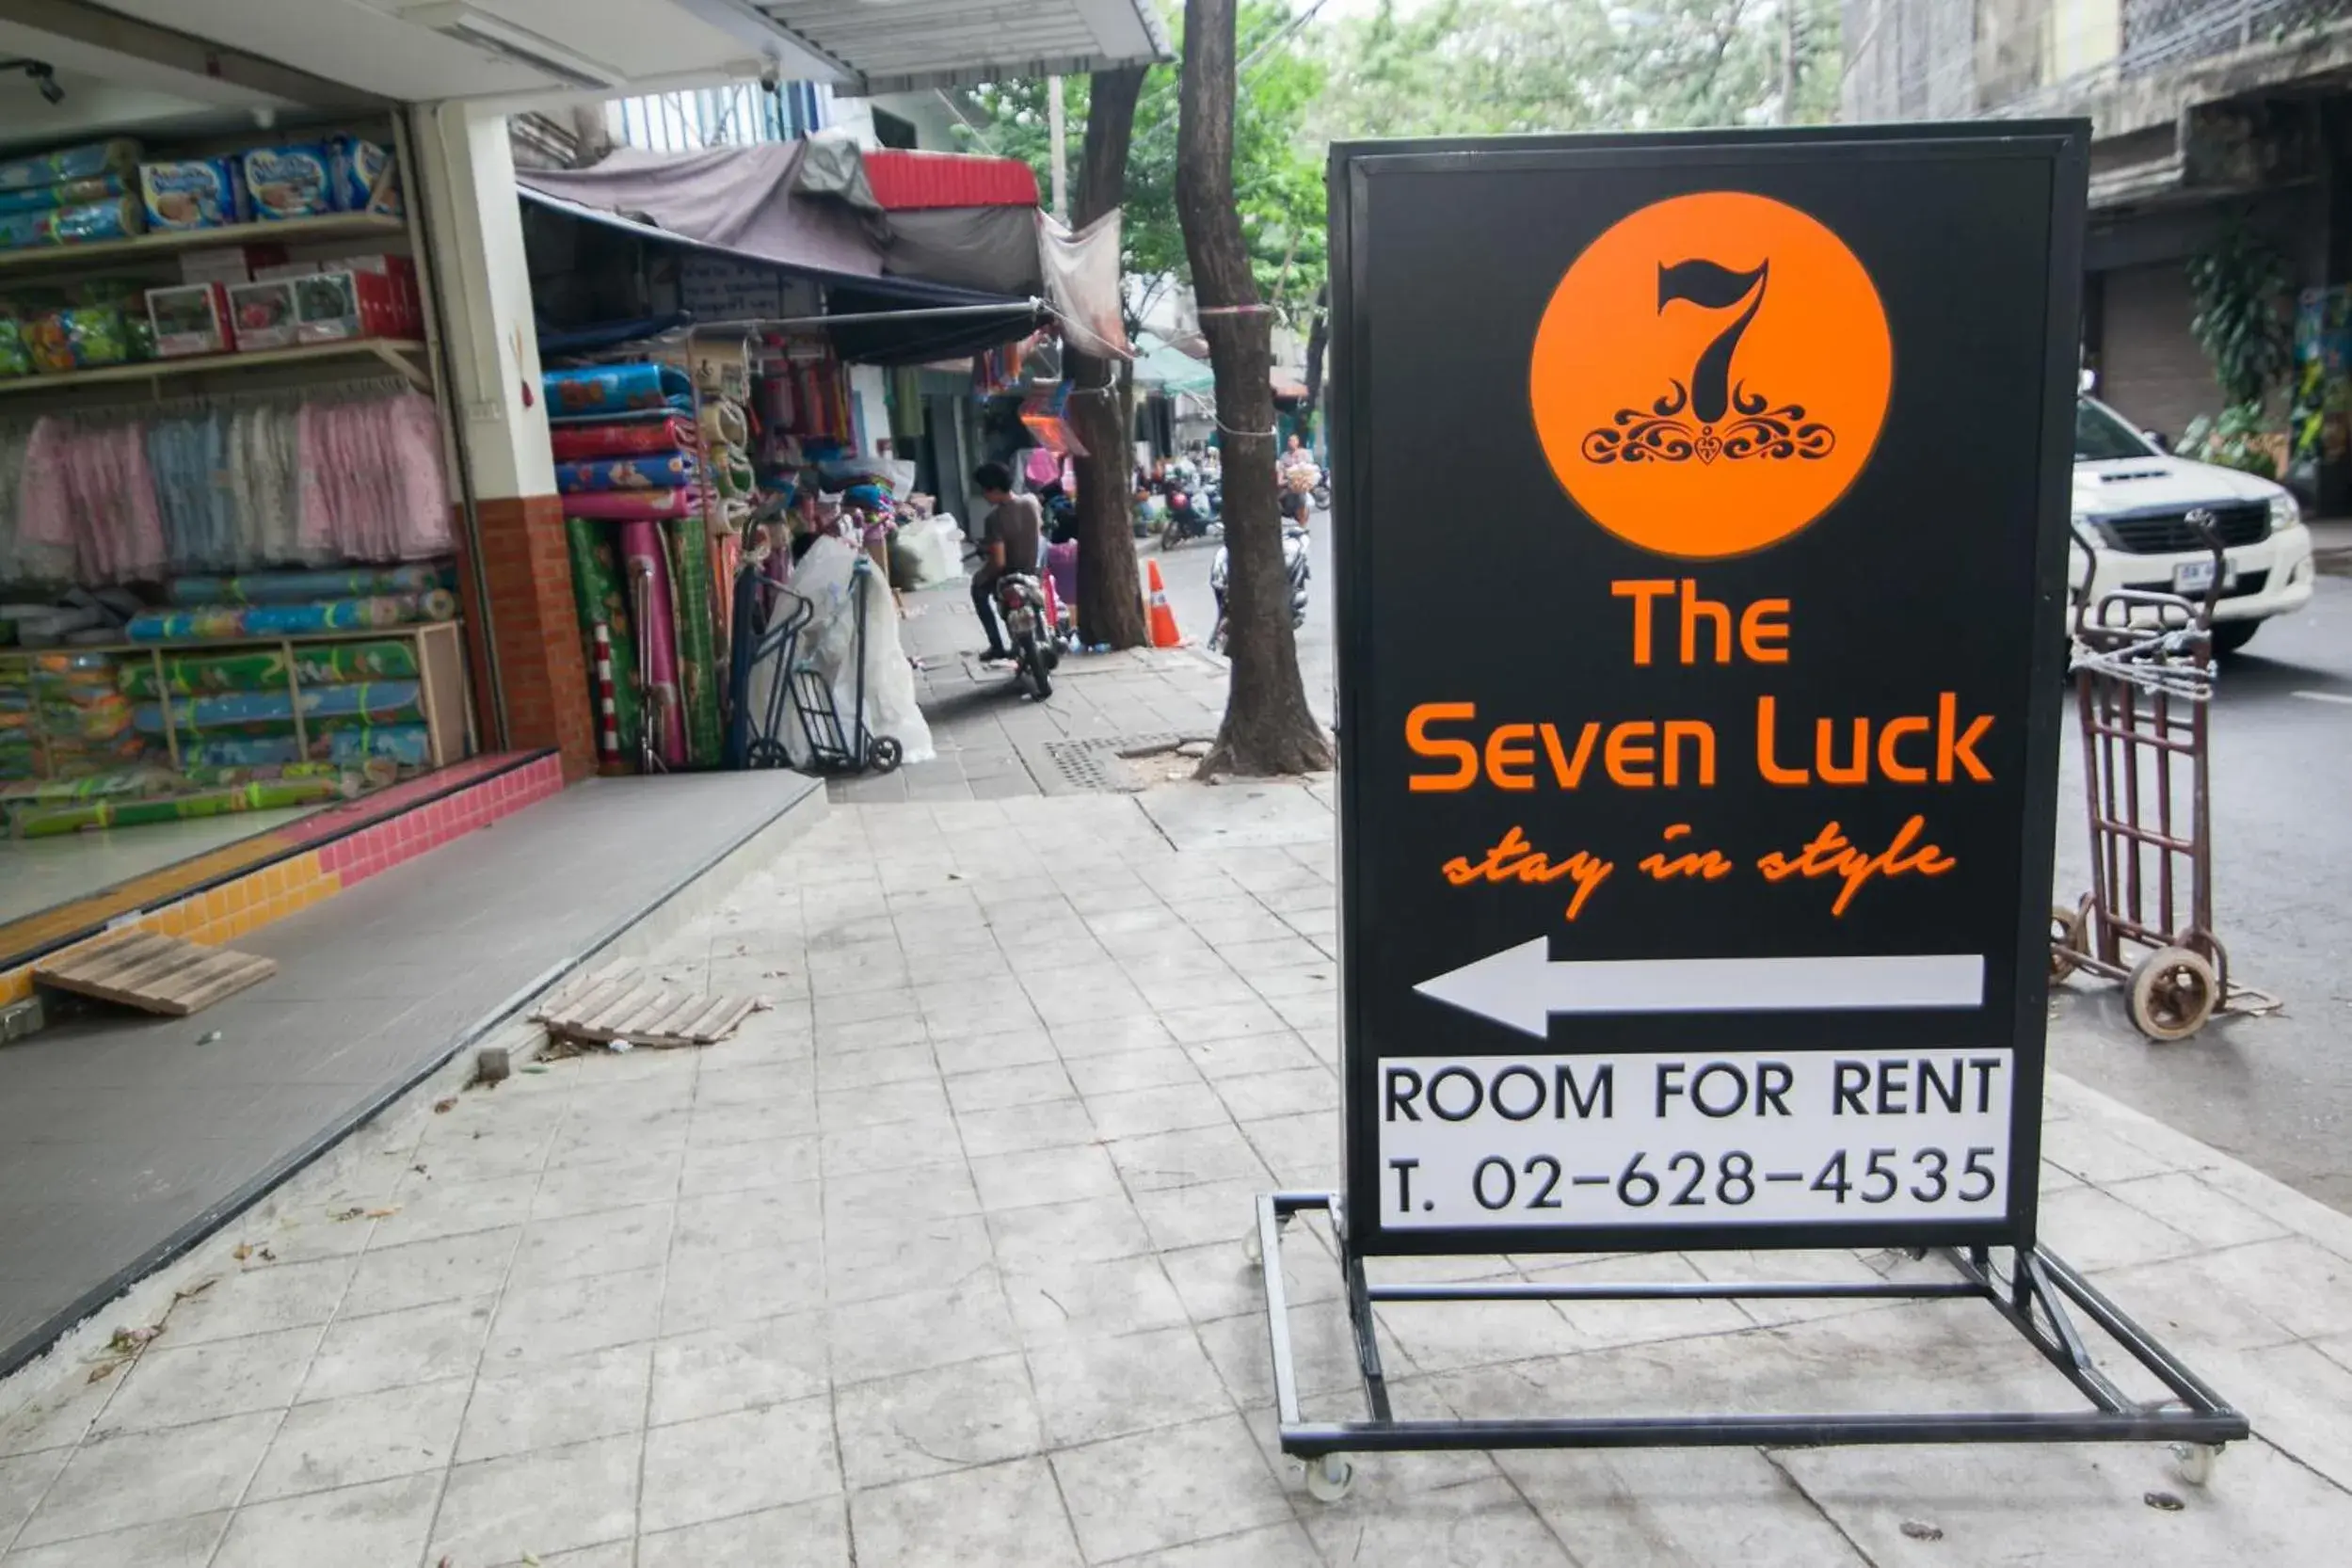 Neighbourhood in The Seven Luck - Stay in Style